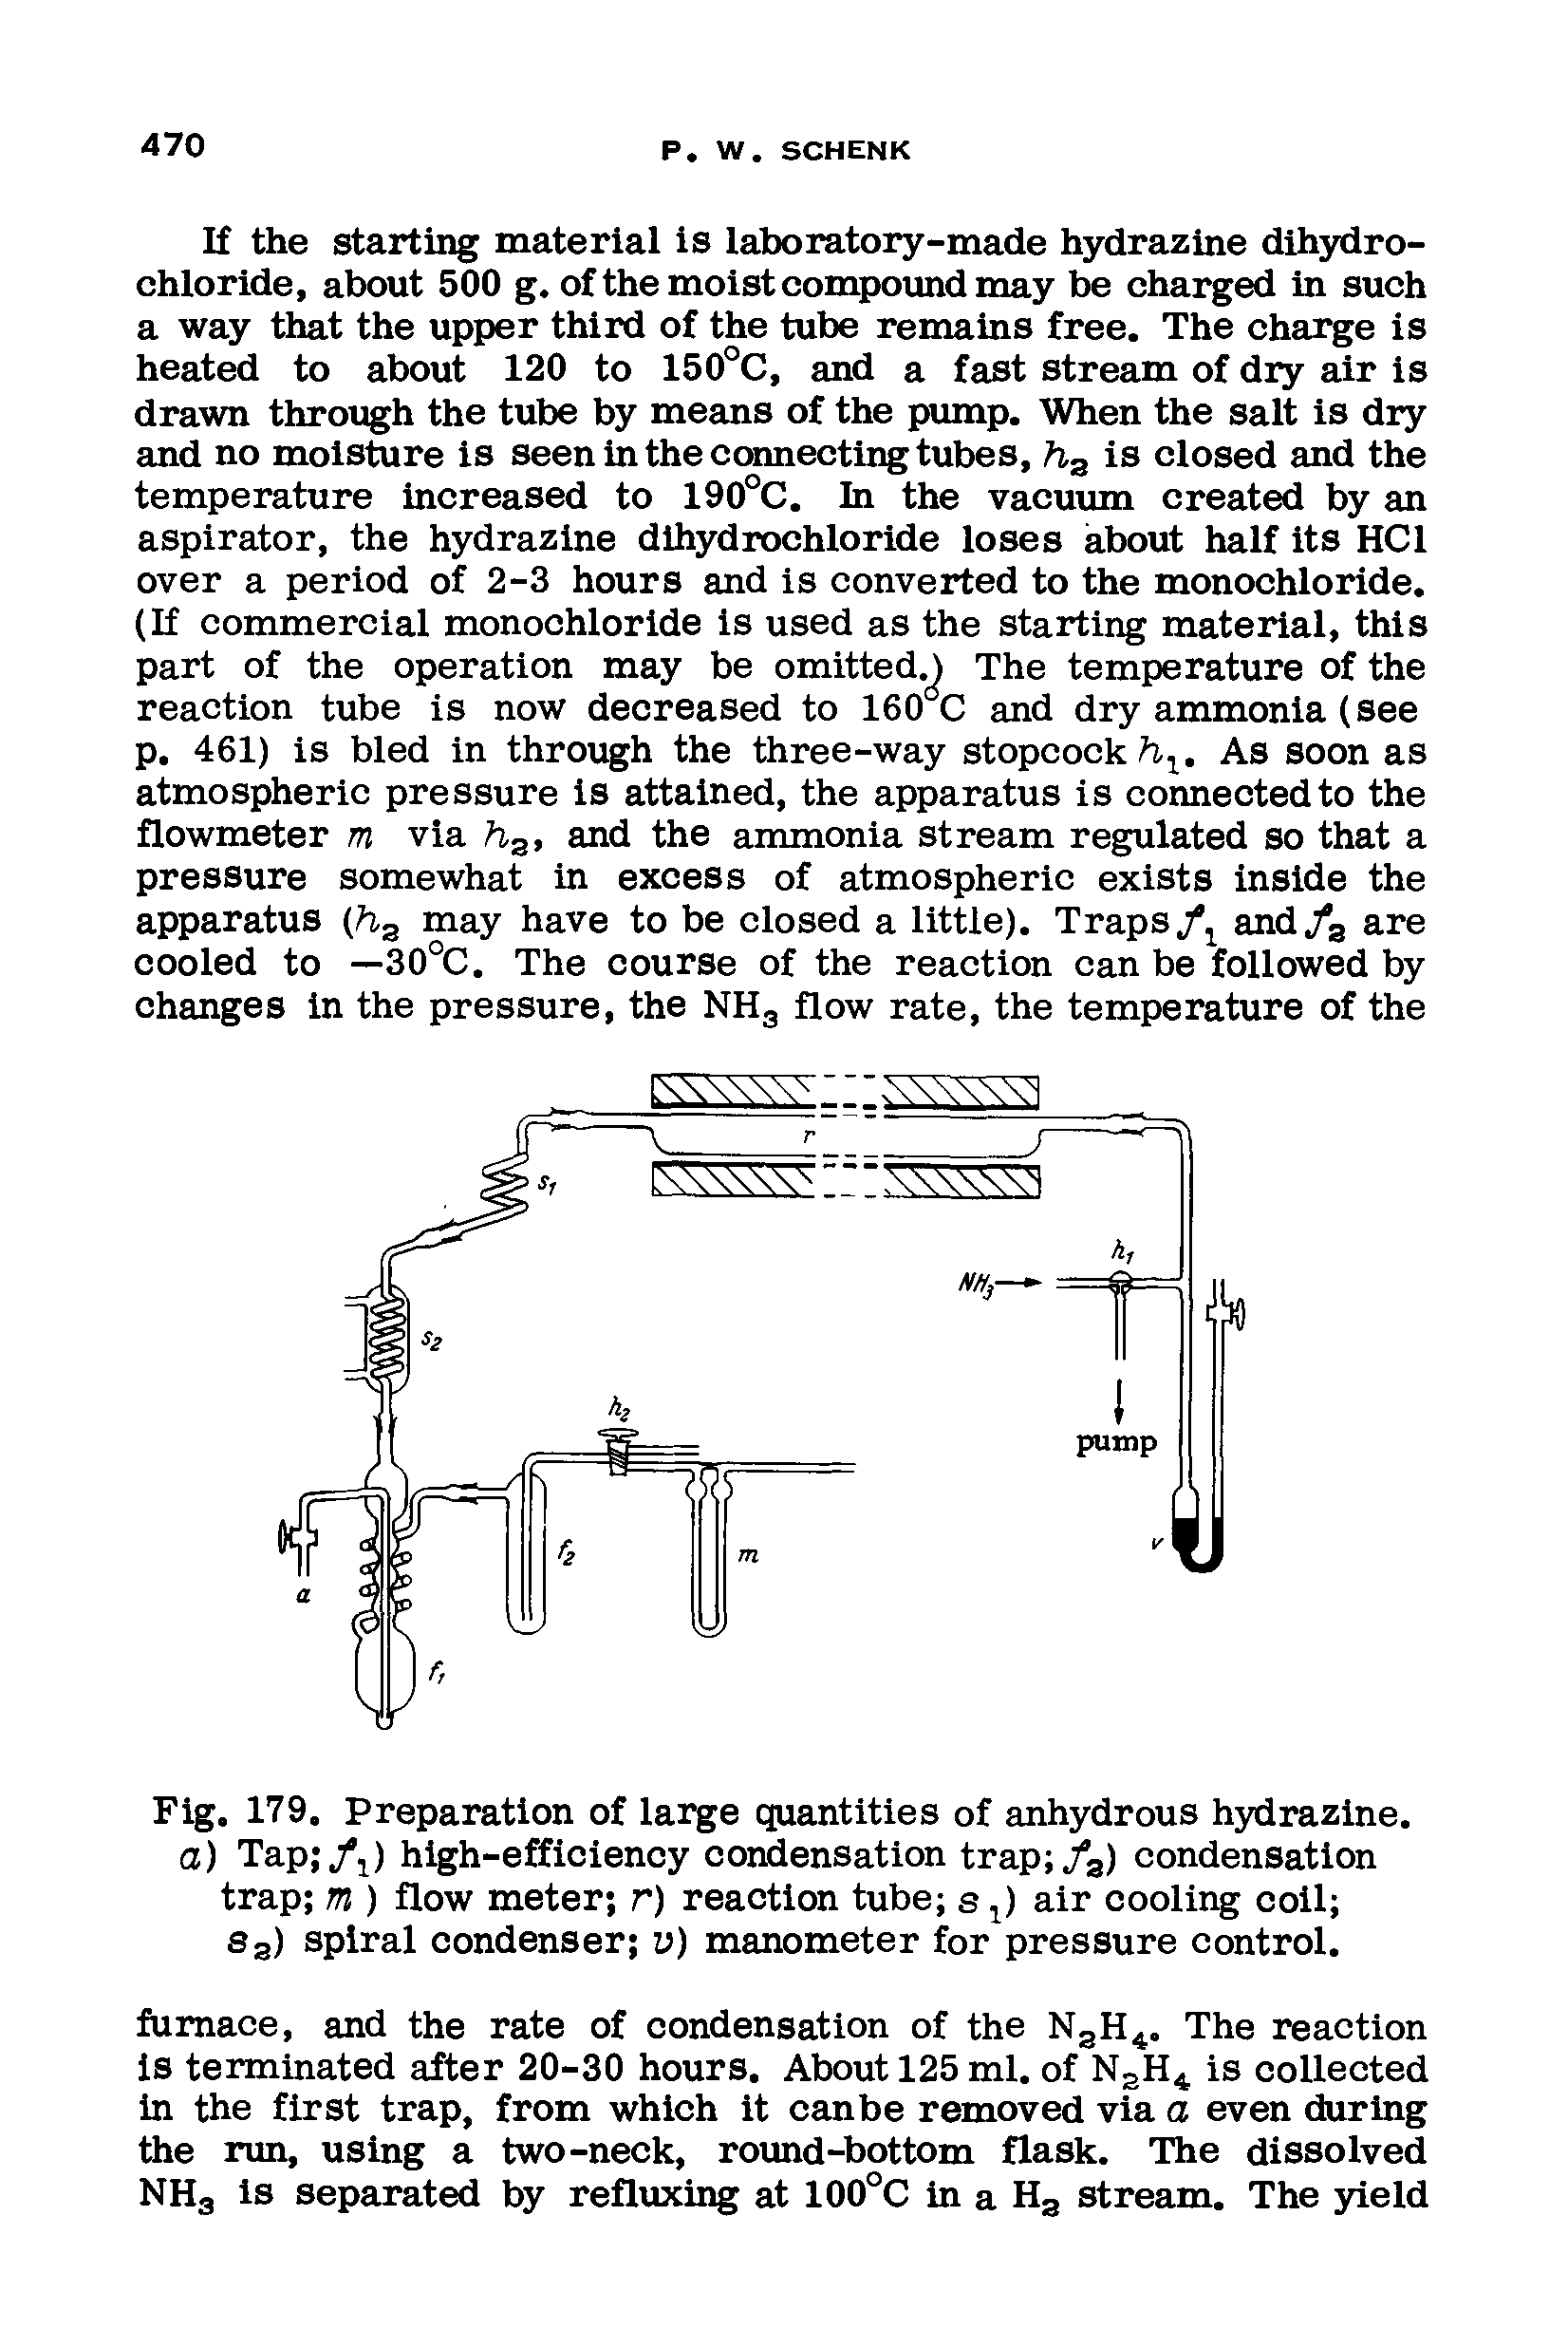 Fig. 179. Preparation of large quantities of anhydrous hydrazine. a) Tap /i) high-efficiency condensation trap /a) condensation trap m ) flow meter r) reaction tube s j) air cooling coll ...